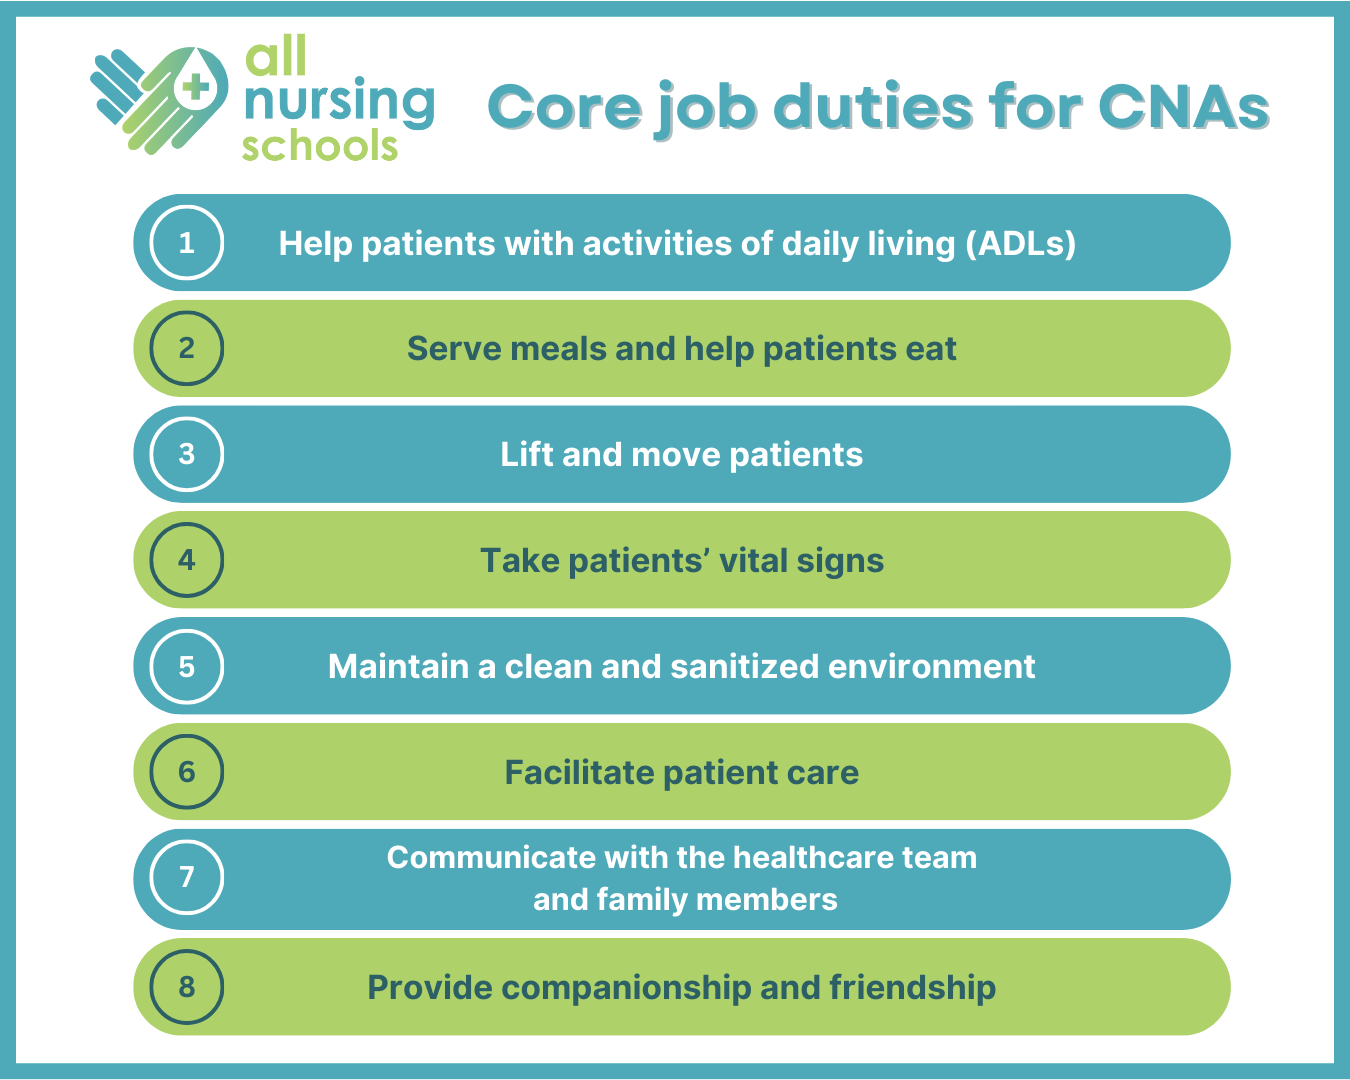 A visual list of the core job duties performed by Certified Nursing Assistants